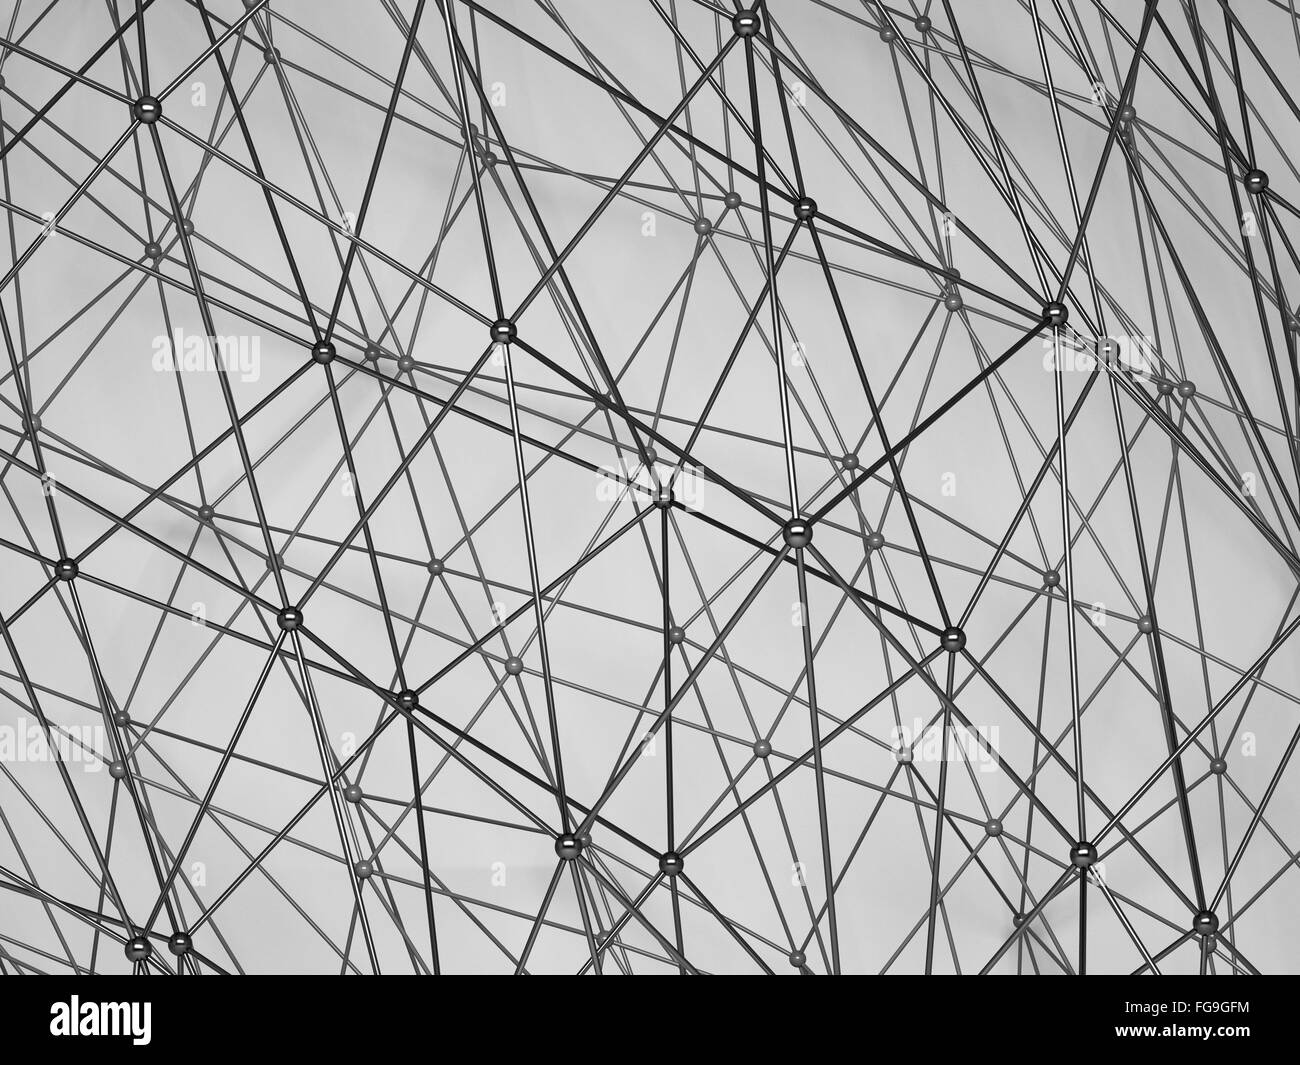 Abstract black shining 3d digital molecular mesh structure over gray background with soft shadows. Digital illustration Stock Photo